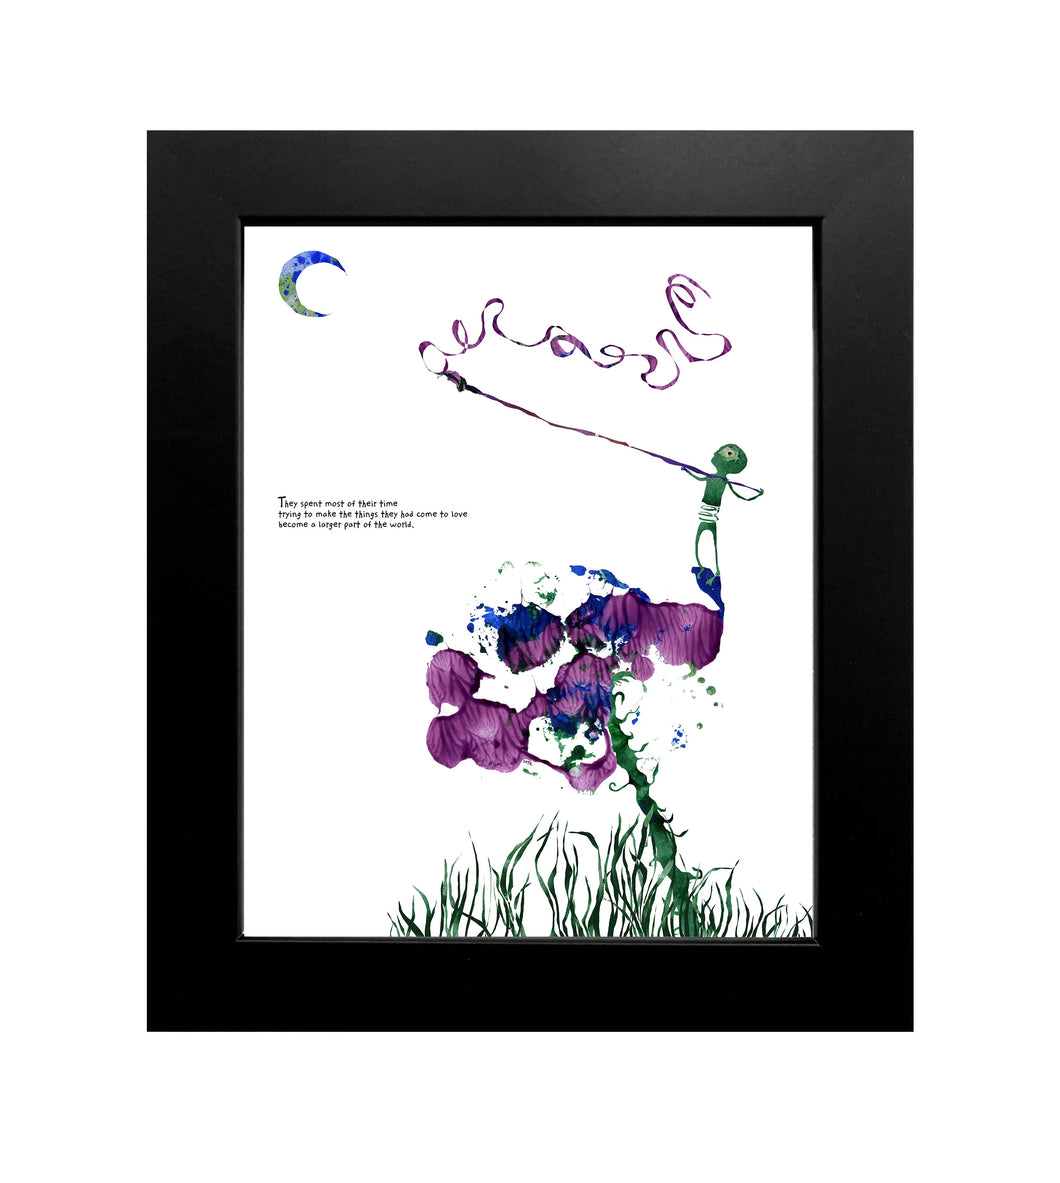 Small Tales - They Did the Best They Could with What They Had (Framed Print)